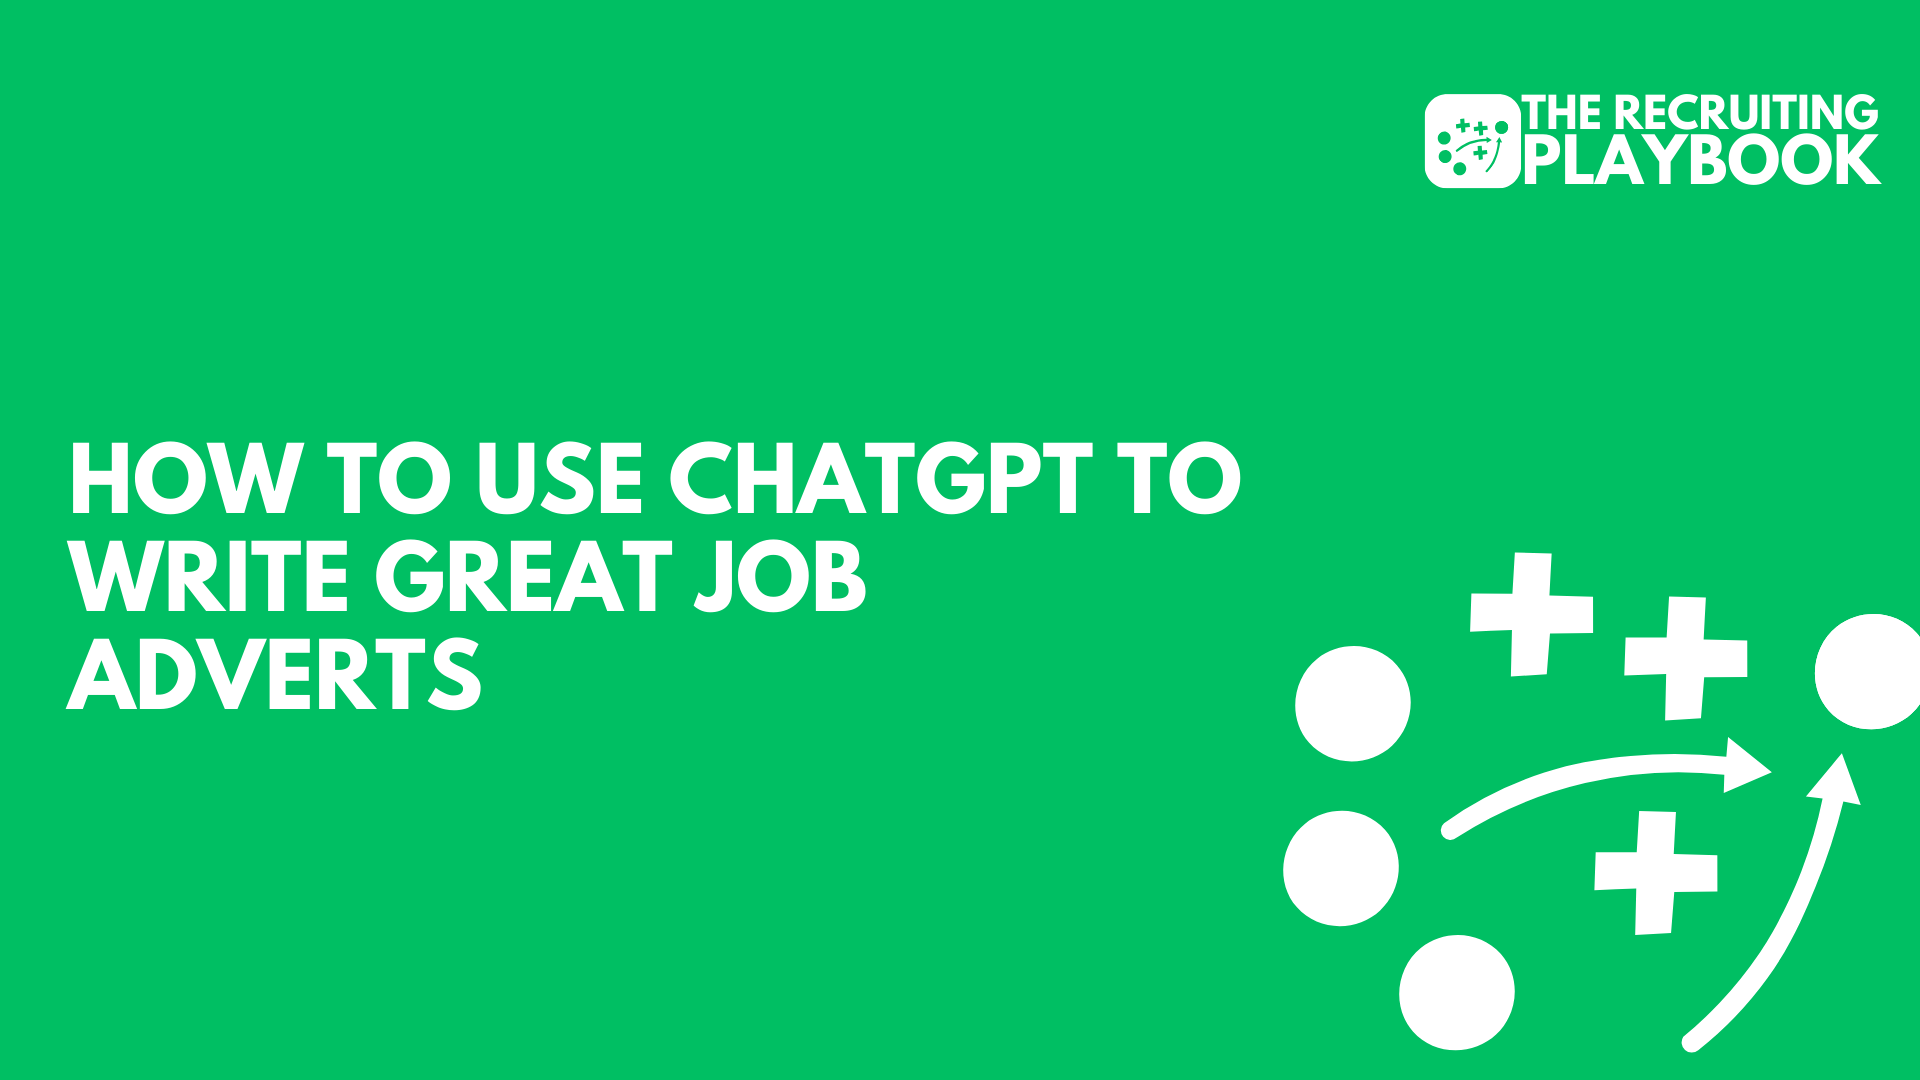 How to use ChatGPT to write great job adverts